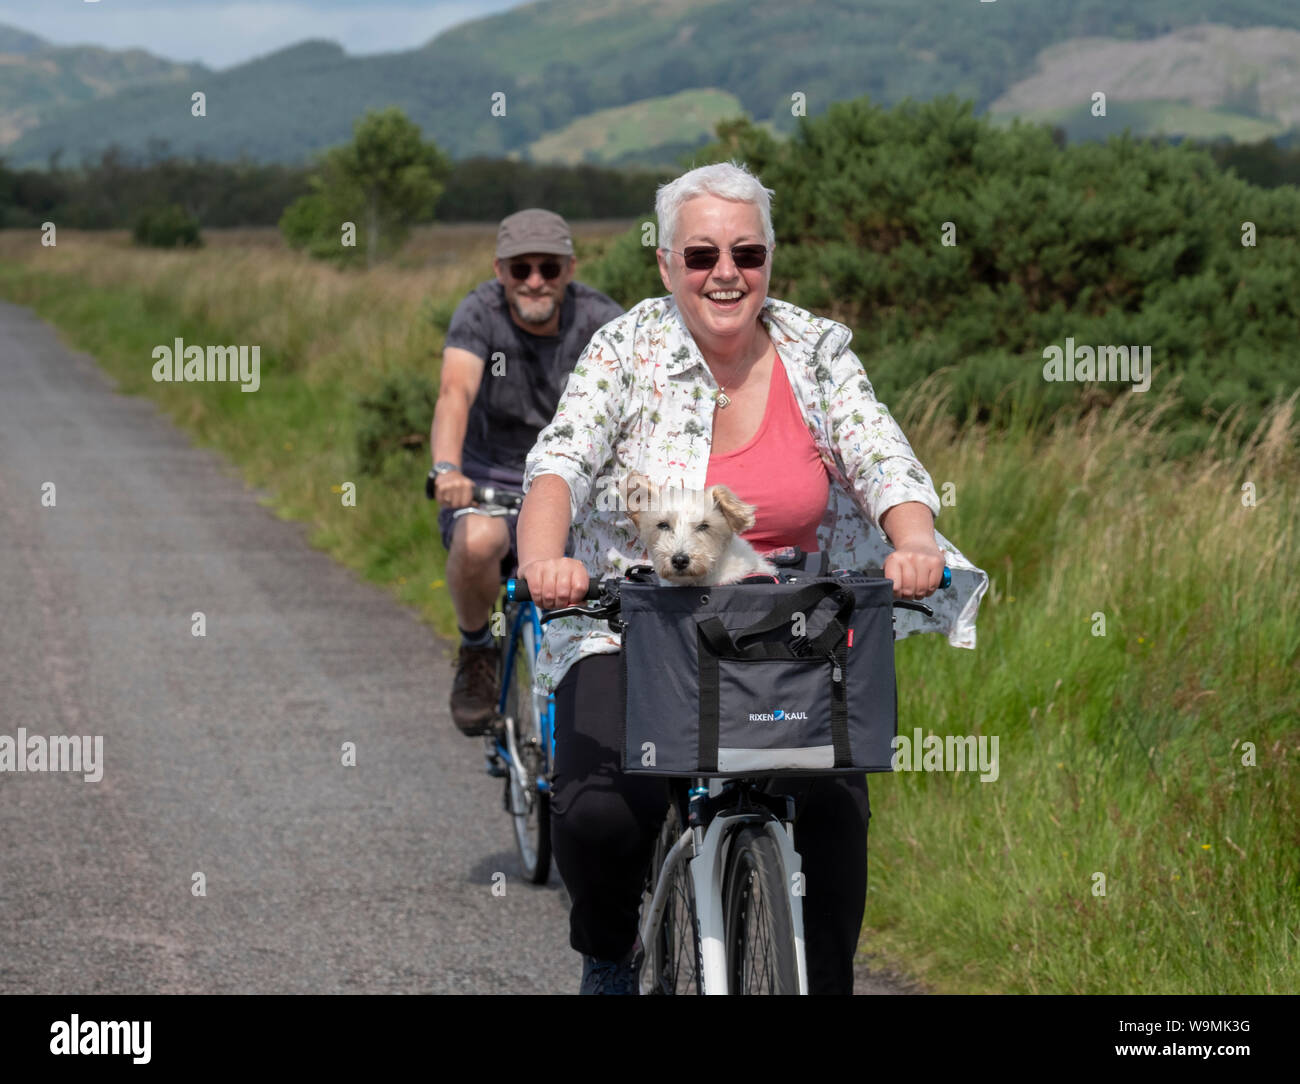 Portrait of a happy cyclist carrying a small dog in her Bicycle basket near Crinan, Argyll. Stock Photo